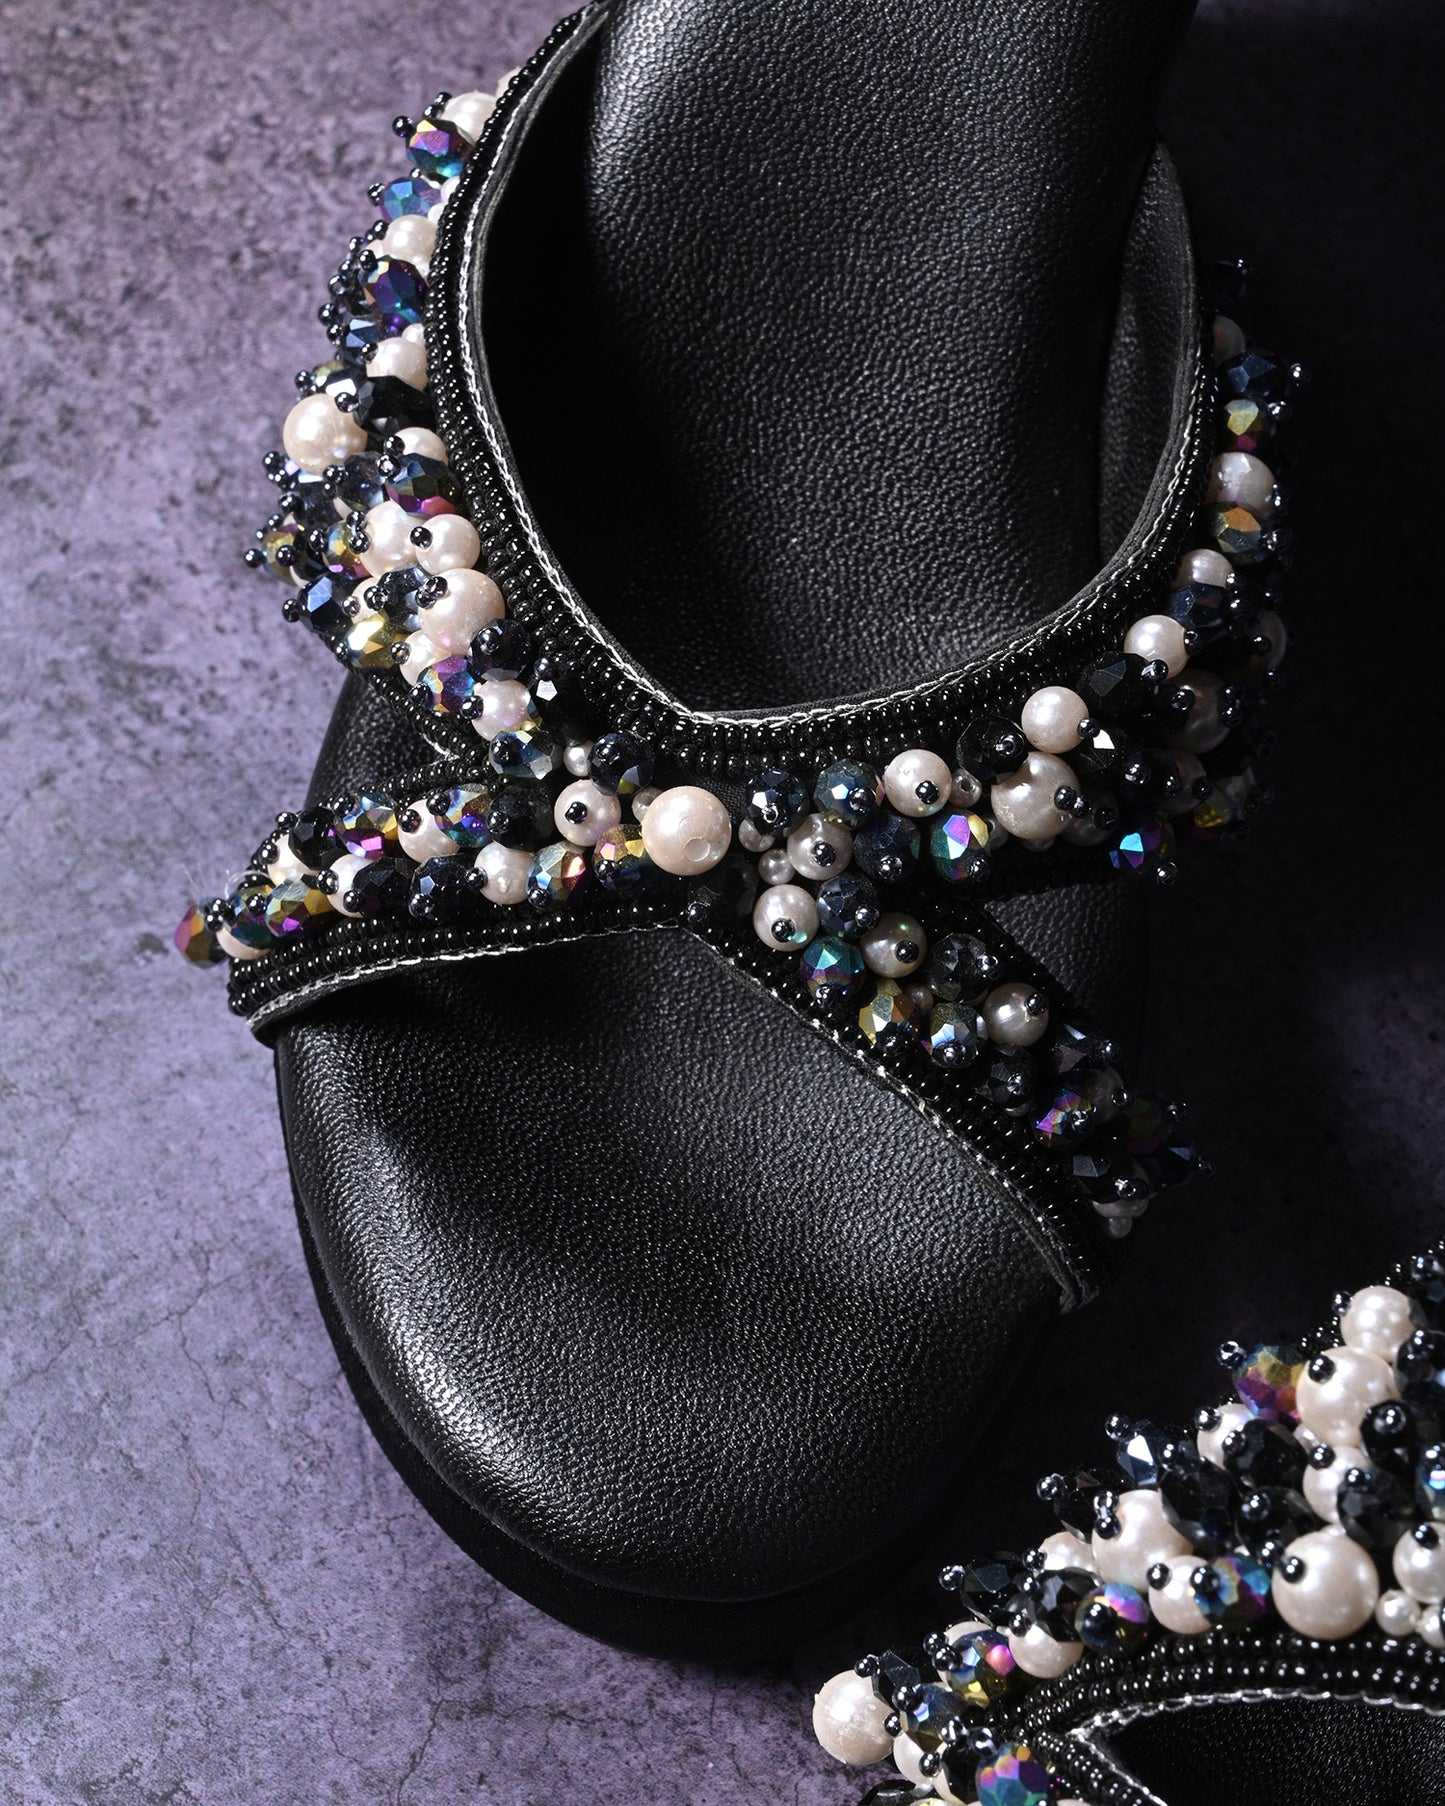 Black Handwork Wedges With Beads And Pearls